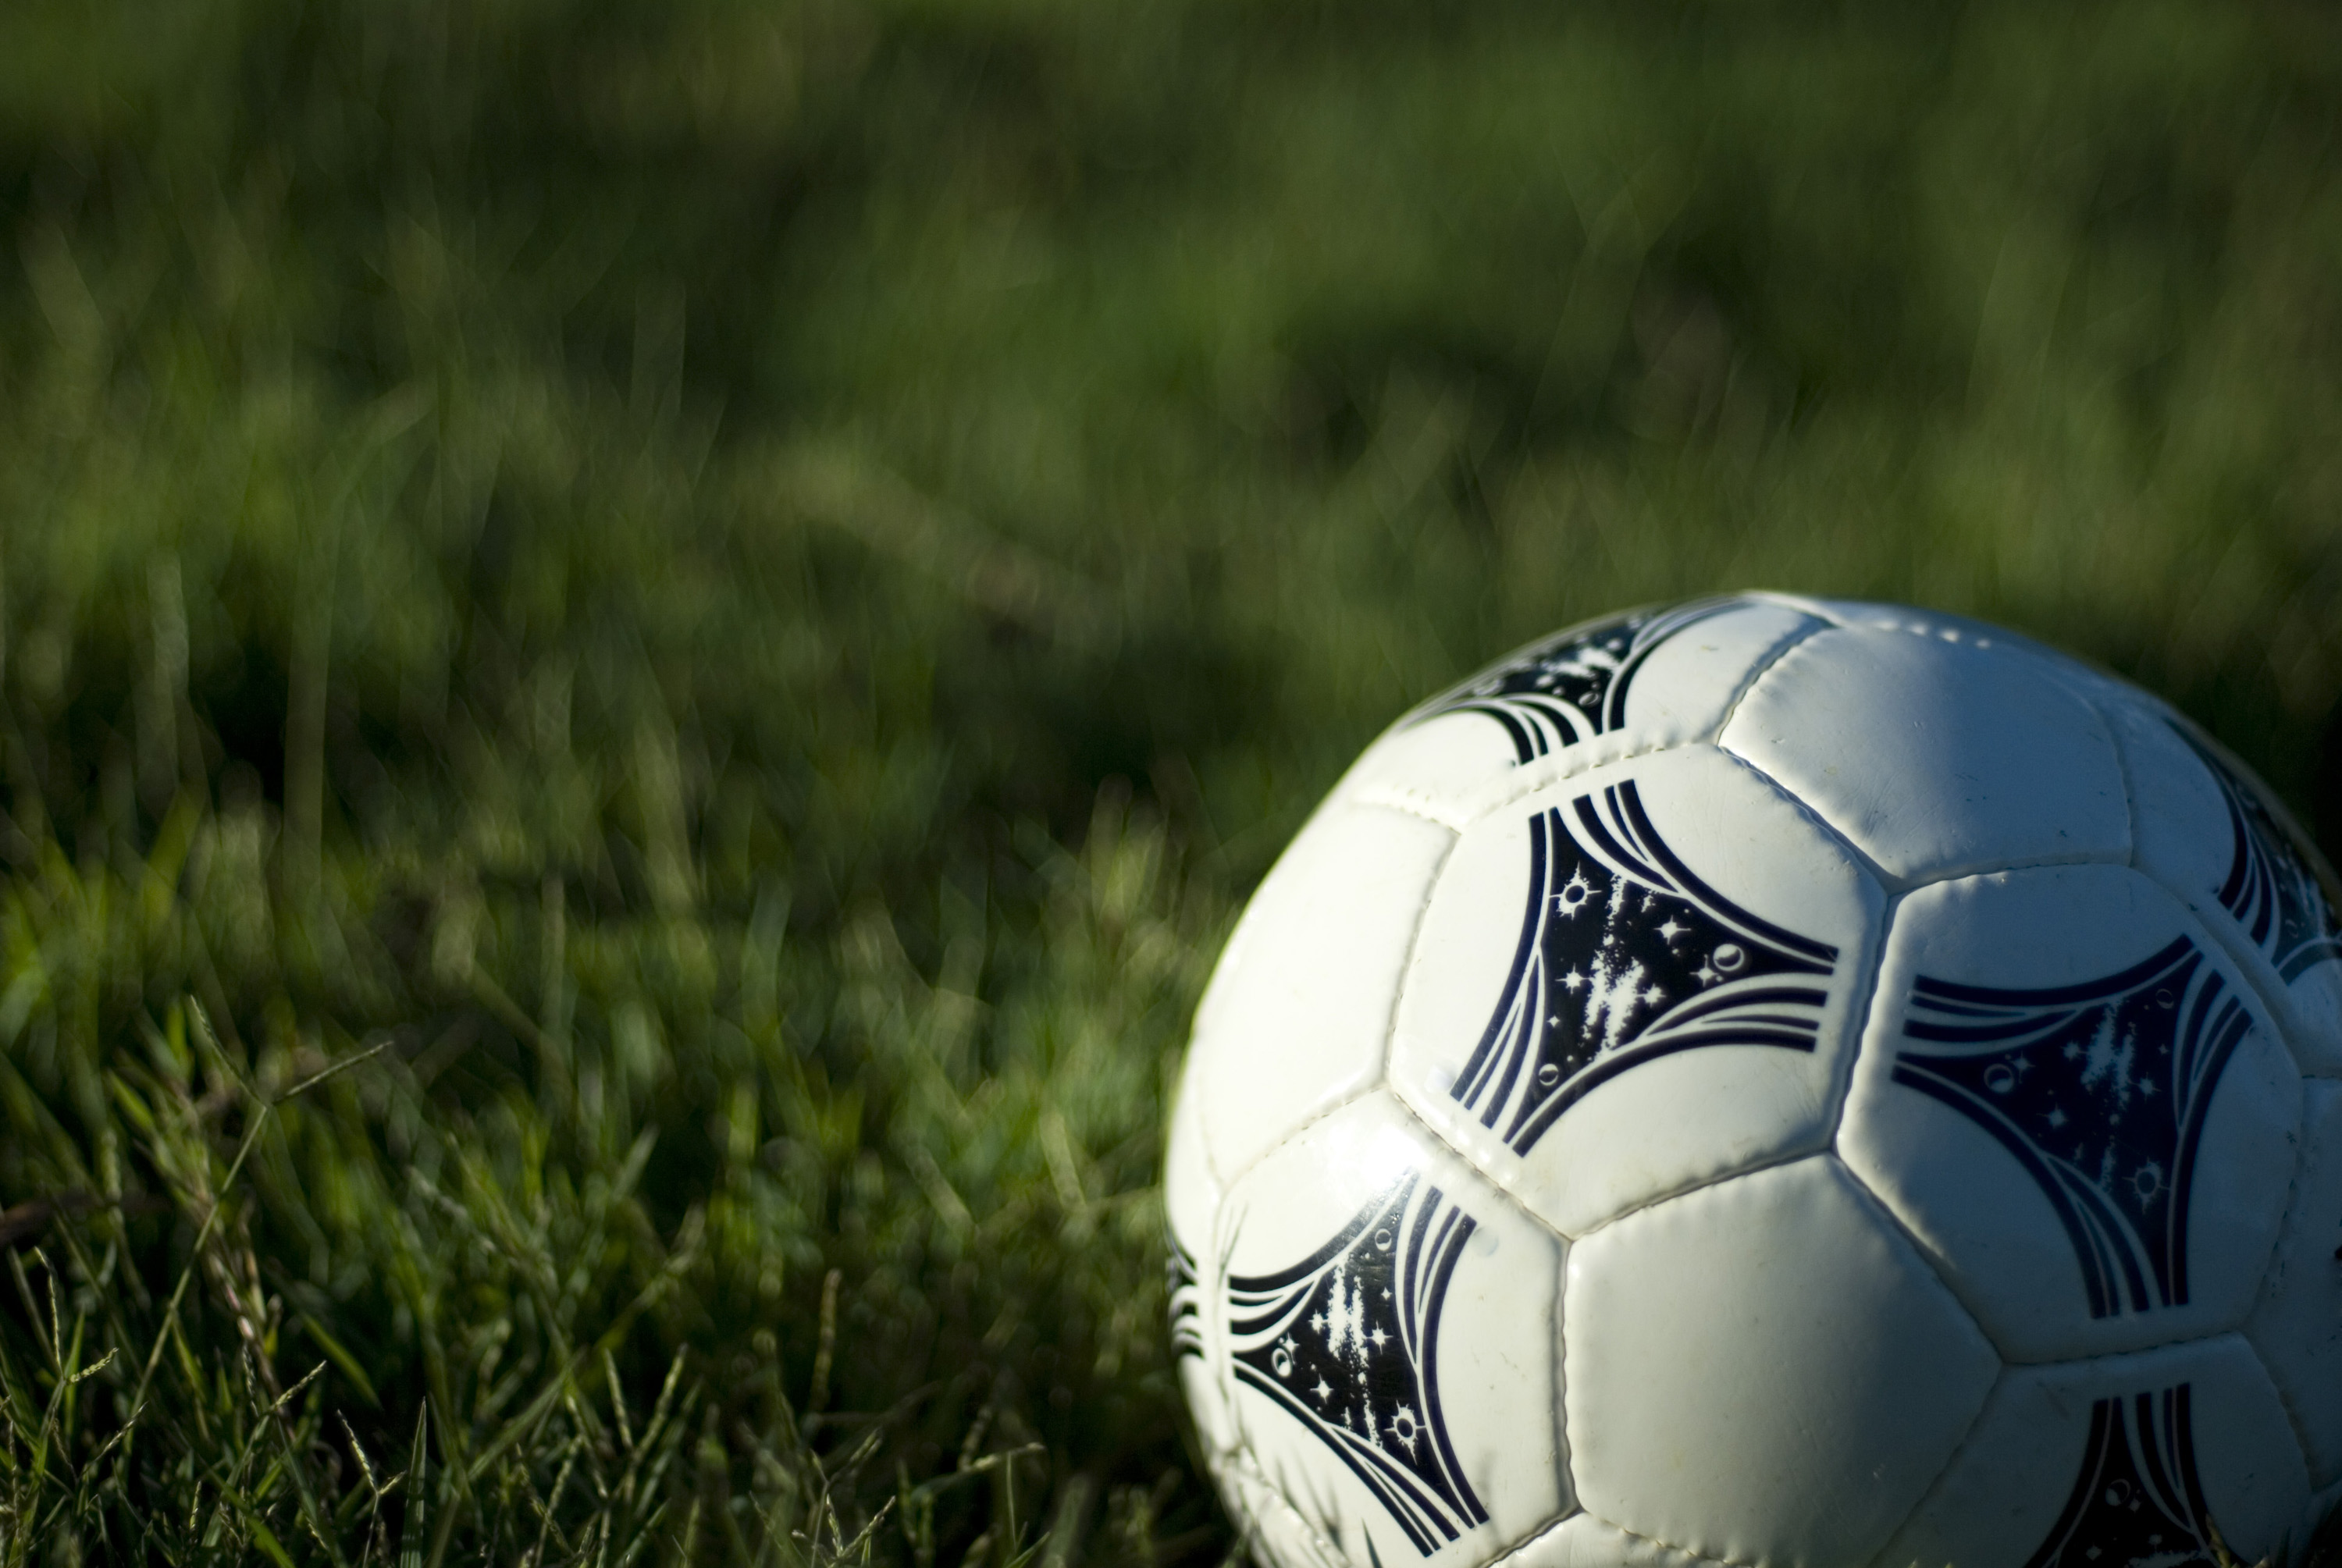 white leather football on a grassy football pitch